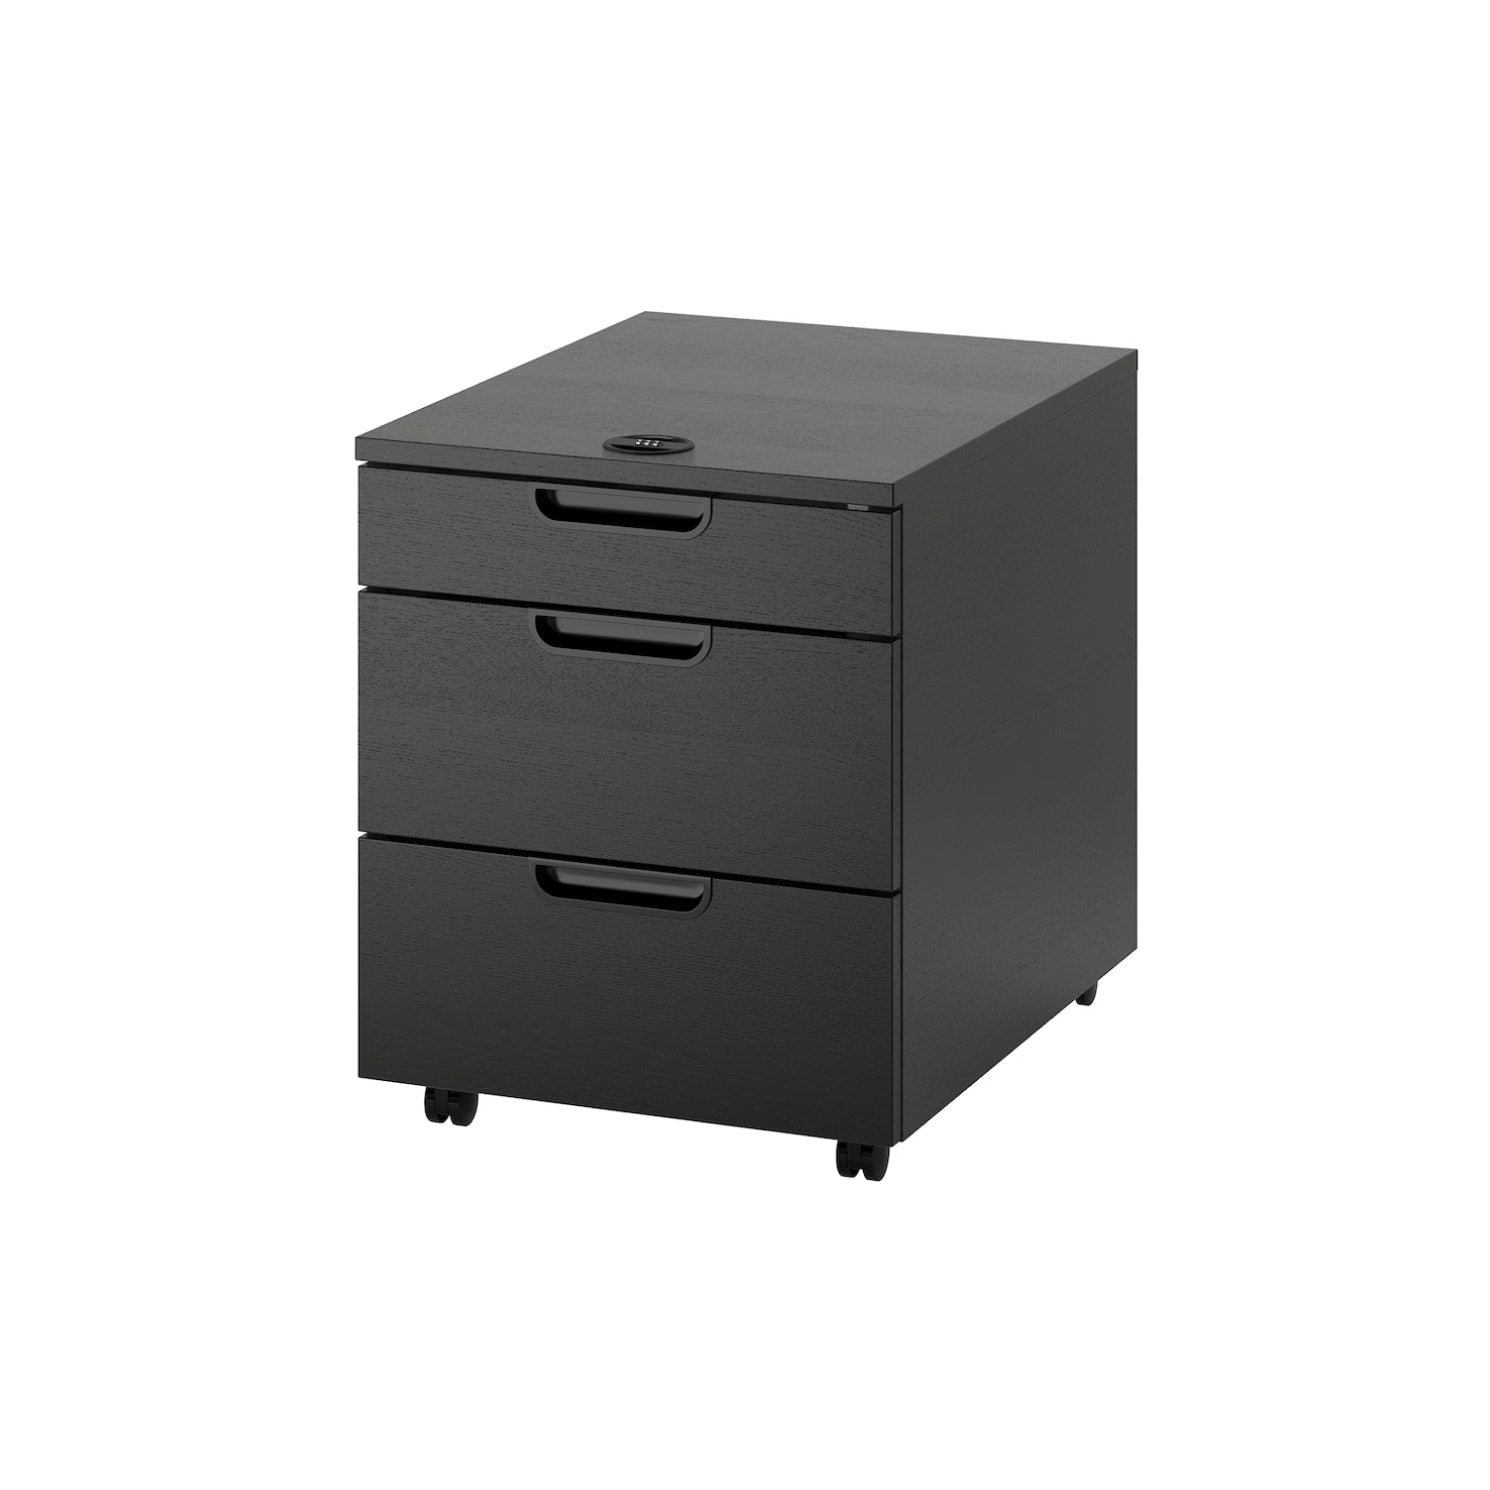 Multi-Drawer Industrial Cabinet